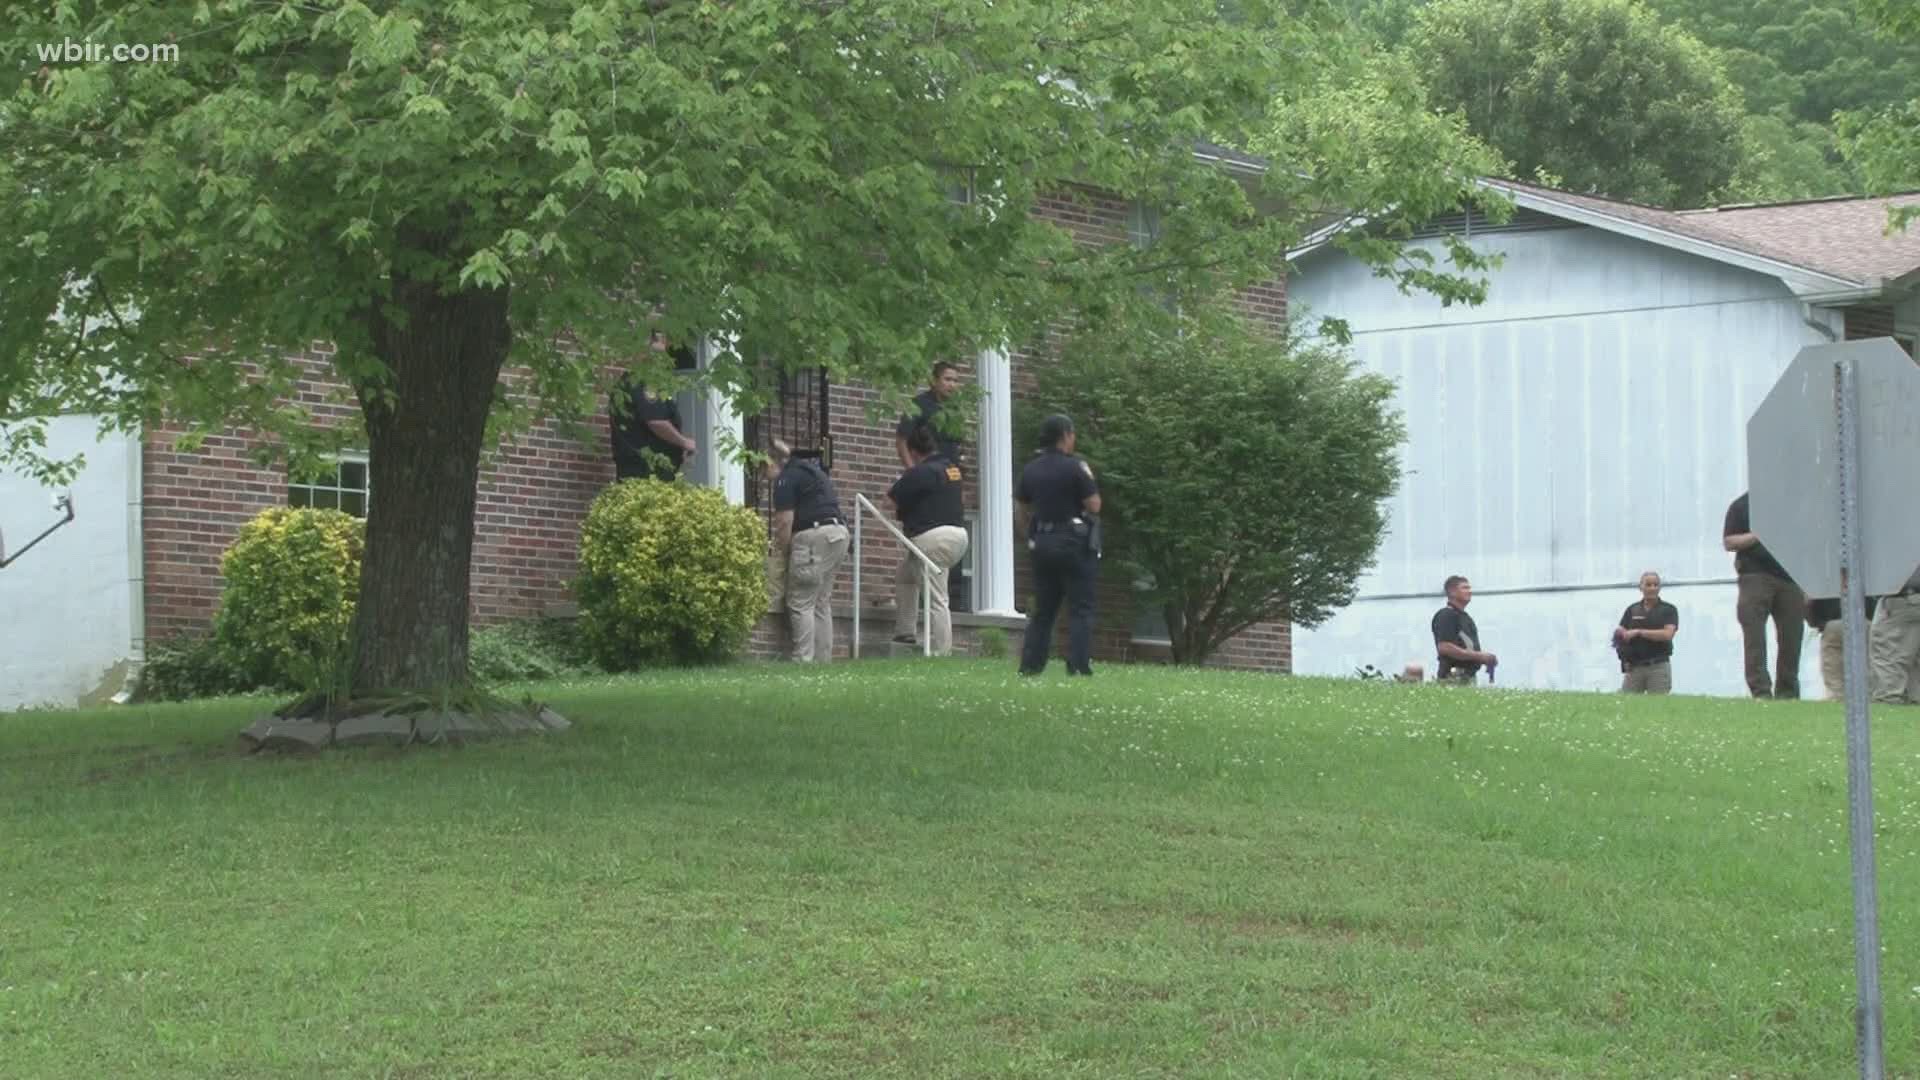 Investigators from Roane County were in Halls questioning a man living in that home who is the adult son of abuse suspects Michael and Shirley Gray.